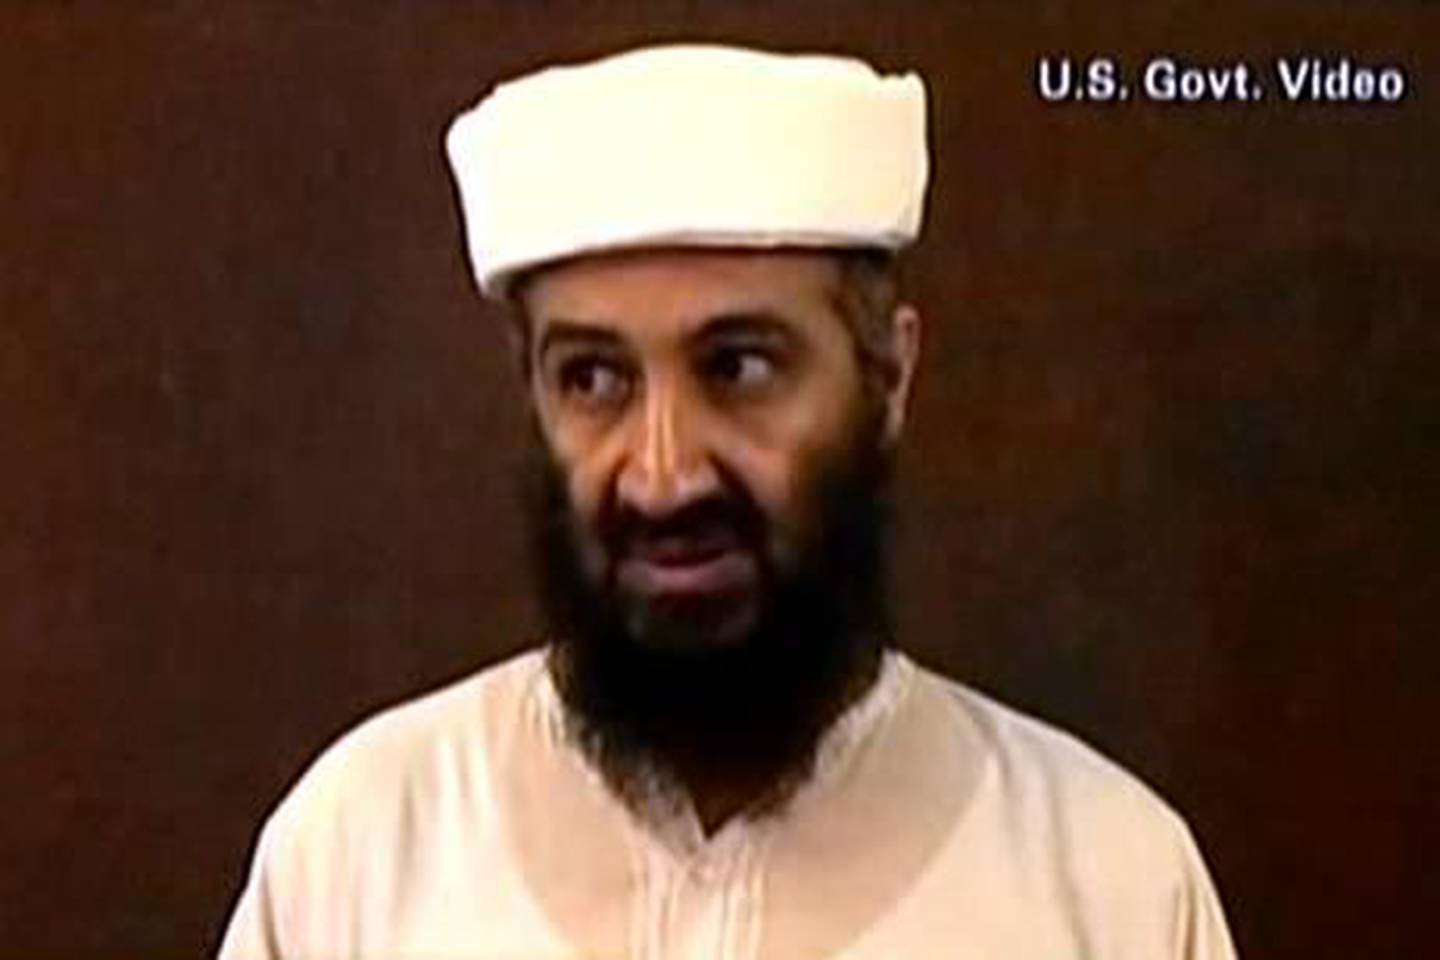 This framegrab from an undated video released by the US Department of Defense on May 7, 2011, reportedly show Al-Qaeda leader Osama bin Laden making a video at his compound in Abbottabad, Pakistan. According to the Defense Department, the video was seized from the compound during a May 1 operation by US special forces in which bin Laden was killed.    = RESTRICTED TO EDITORIAL USE - MANDATORY CREDIT "AFP PHOTO / US Department of Defense" - NO MARKETING NO ADVERTISING CAMPAIGNS - DISTRIBUTED AS A SERVICE TO CLIENTS  =
 *** Local Caption ***  945442-01-08.jpg